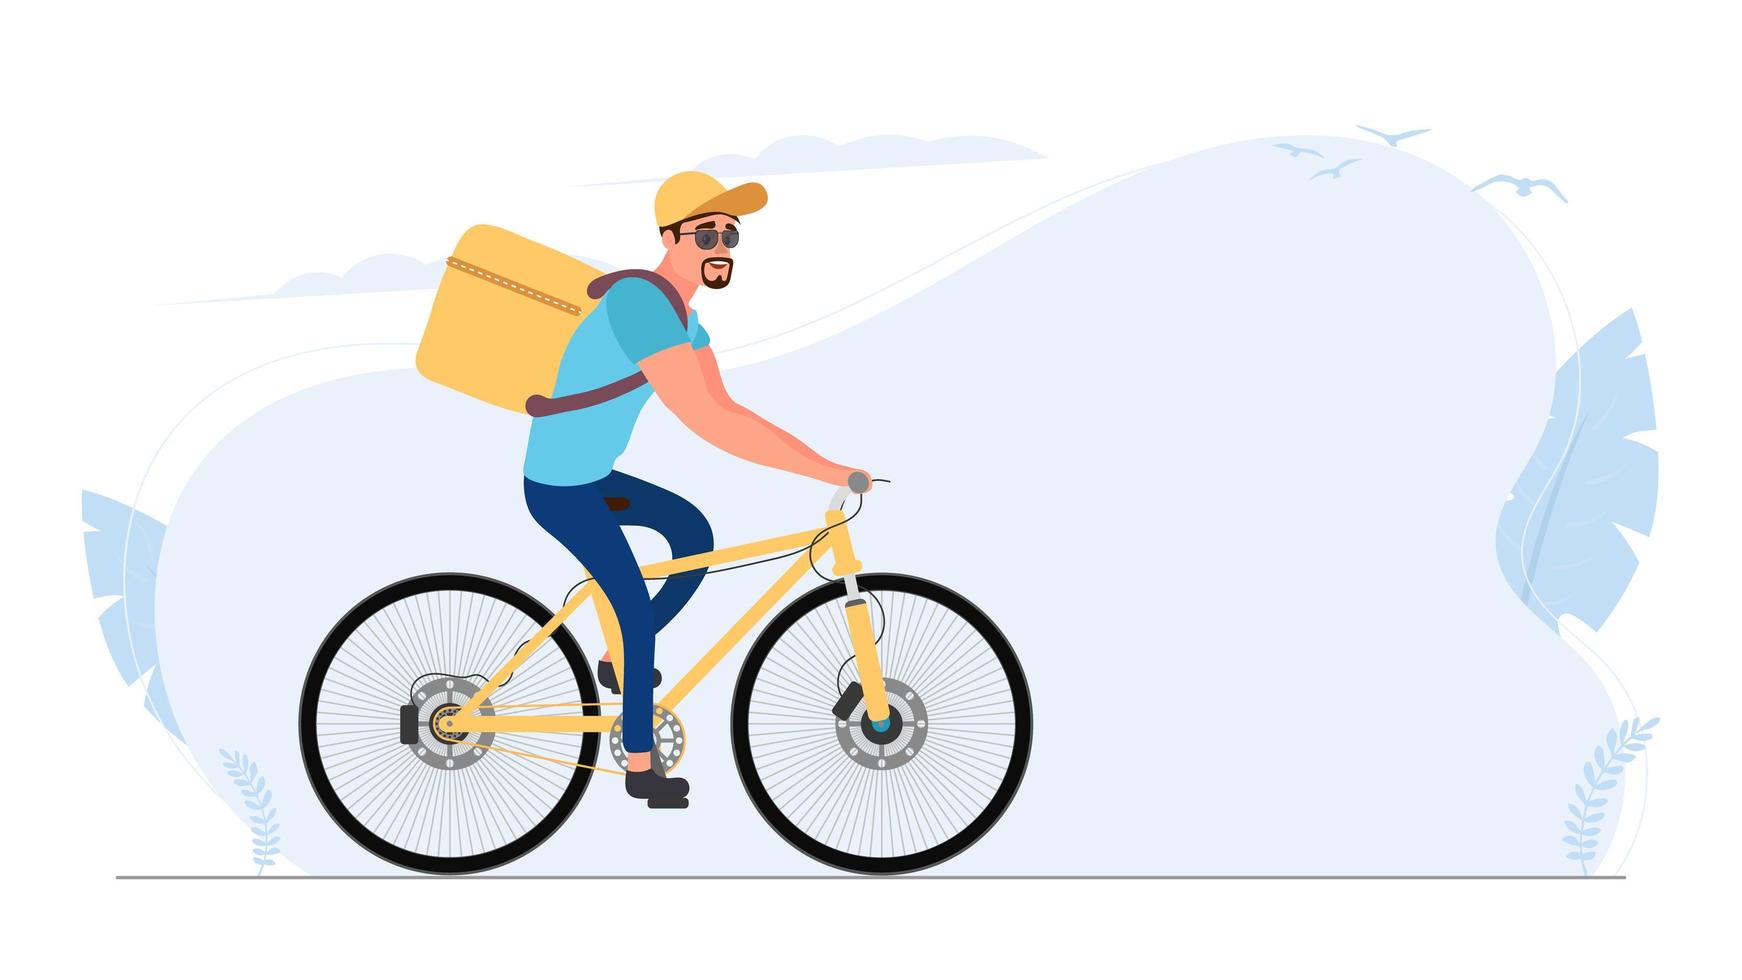 Food delivery by bike. The guy on a bicycle rides in the park. Bicycle delivery concept. Vector stock illustration.